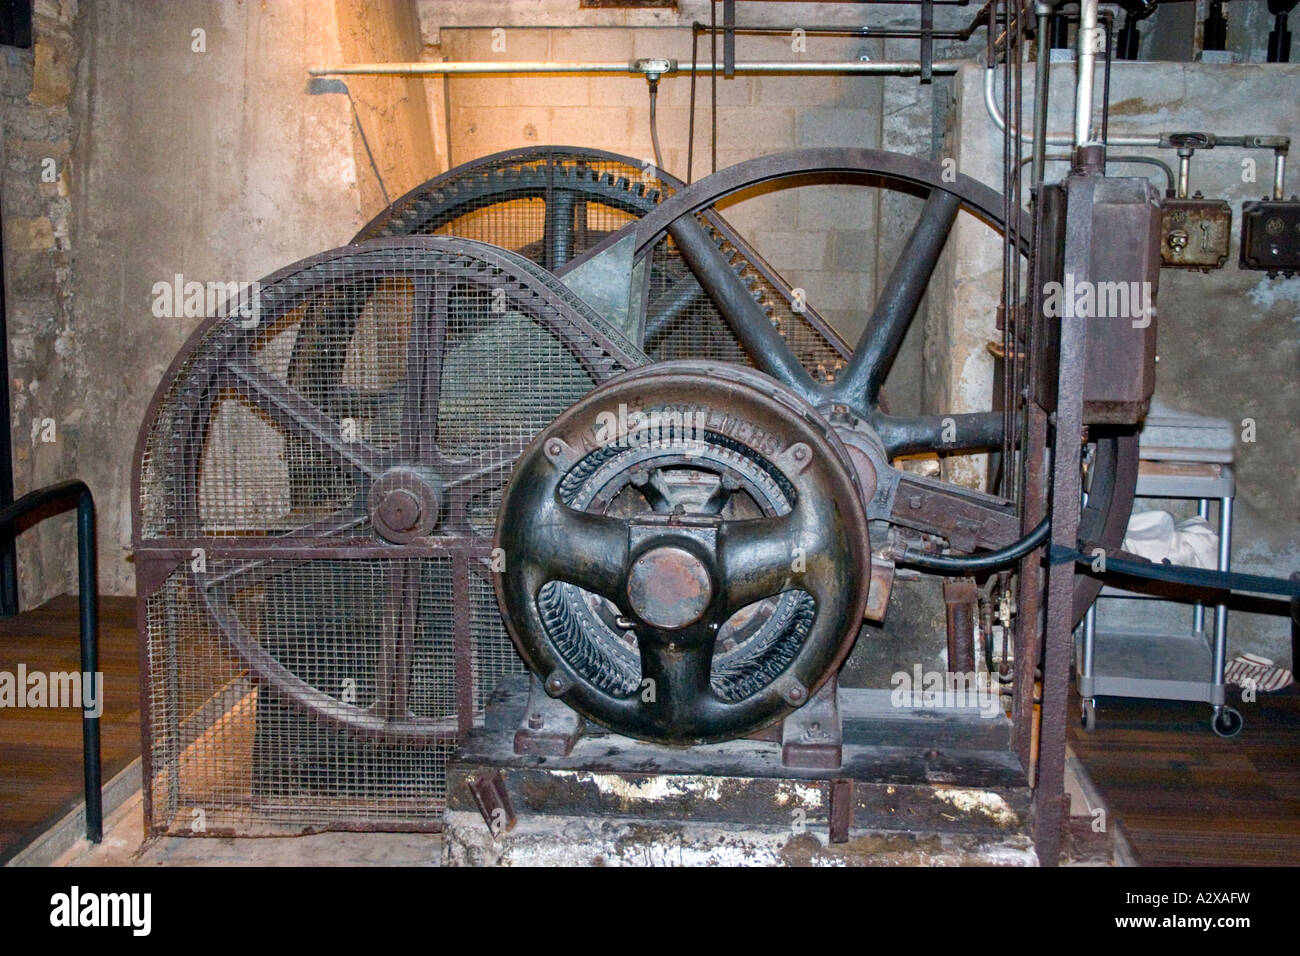 Gears and wheels that turned the flour milling machines. Mill City Museum Minneapolis Minnesota USA Stock Photo